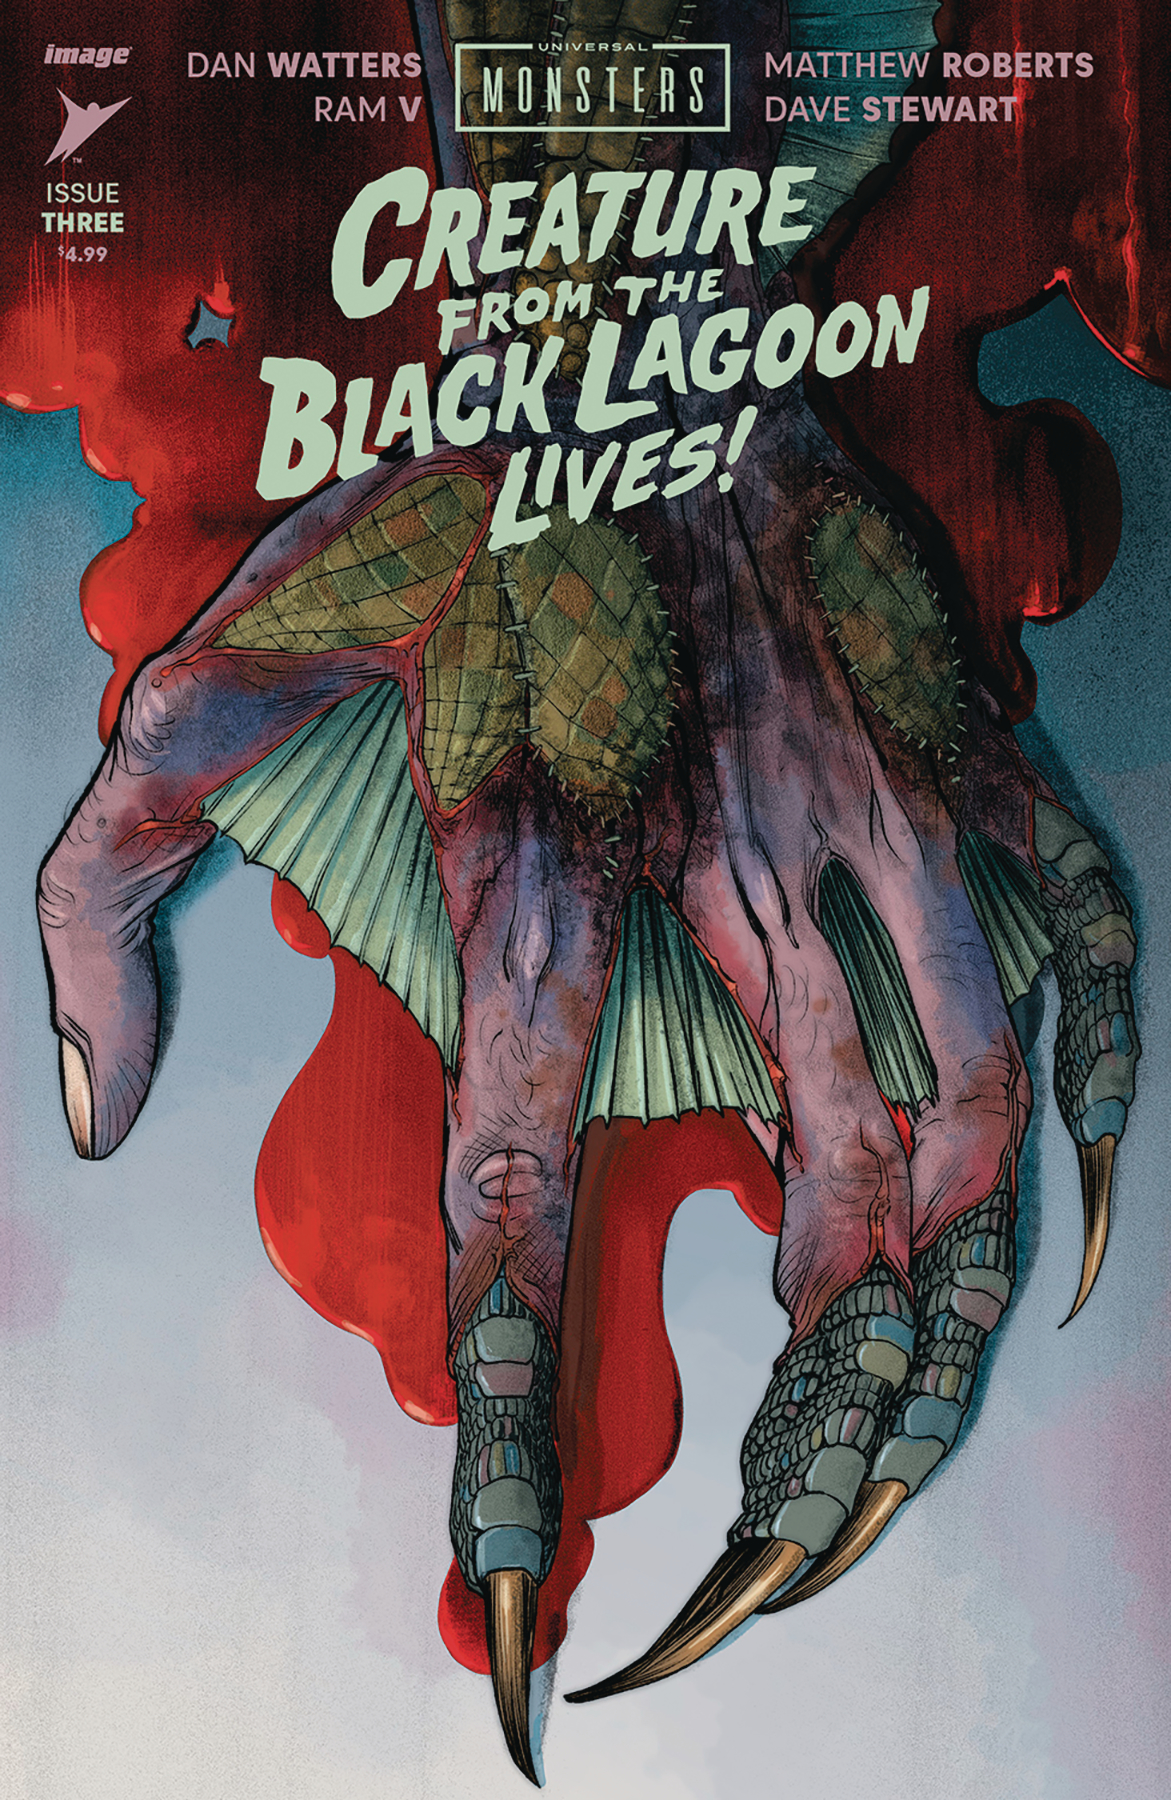 Universal Monsters the Creature from the Black Lagoon Lives #3 Cover A Matthew Roberts & Dave Ste (Of 4)